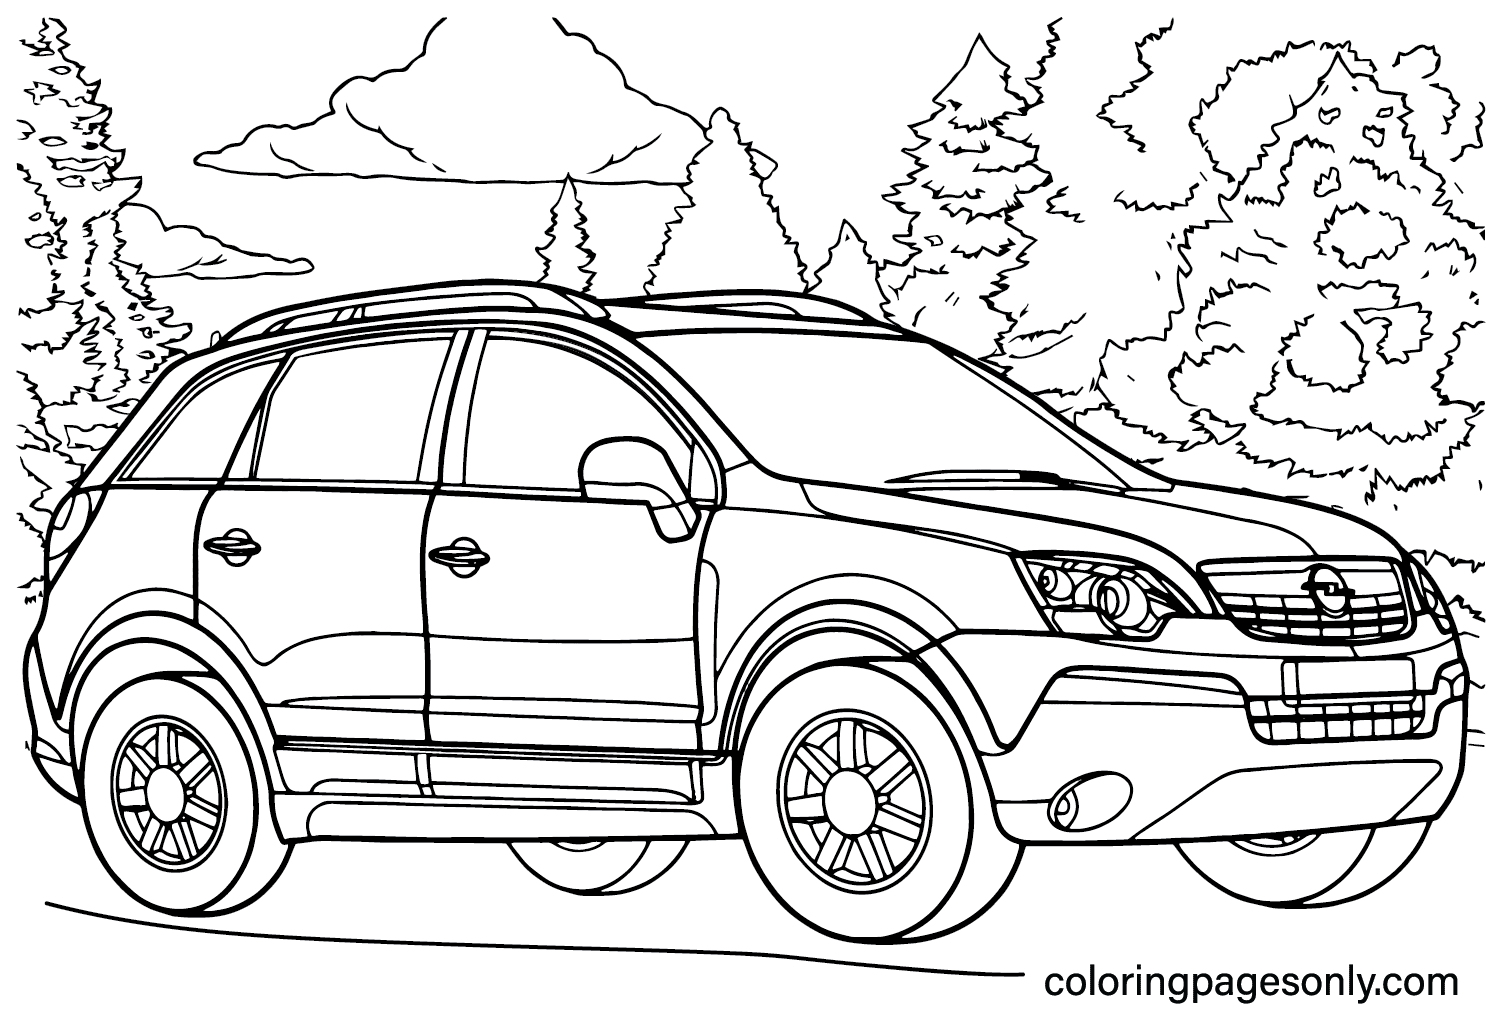 Opel Antara Coloring Page from Opel